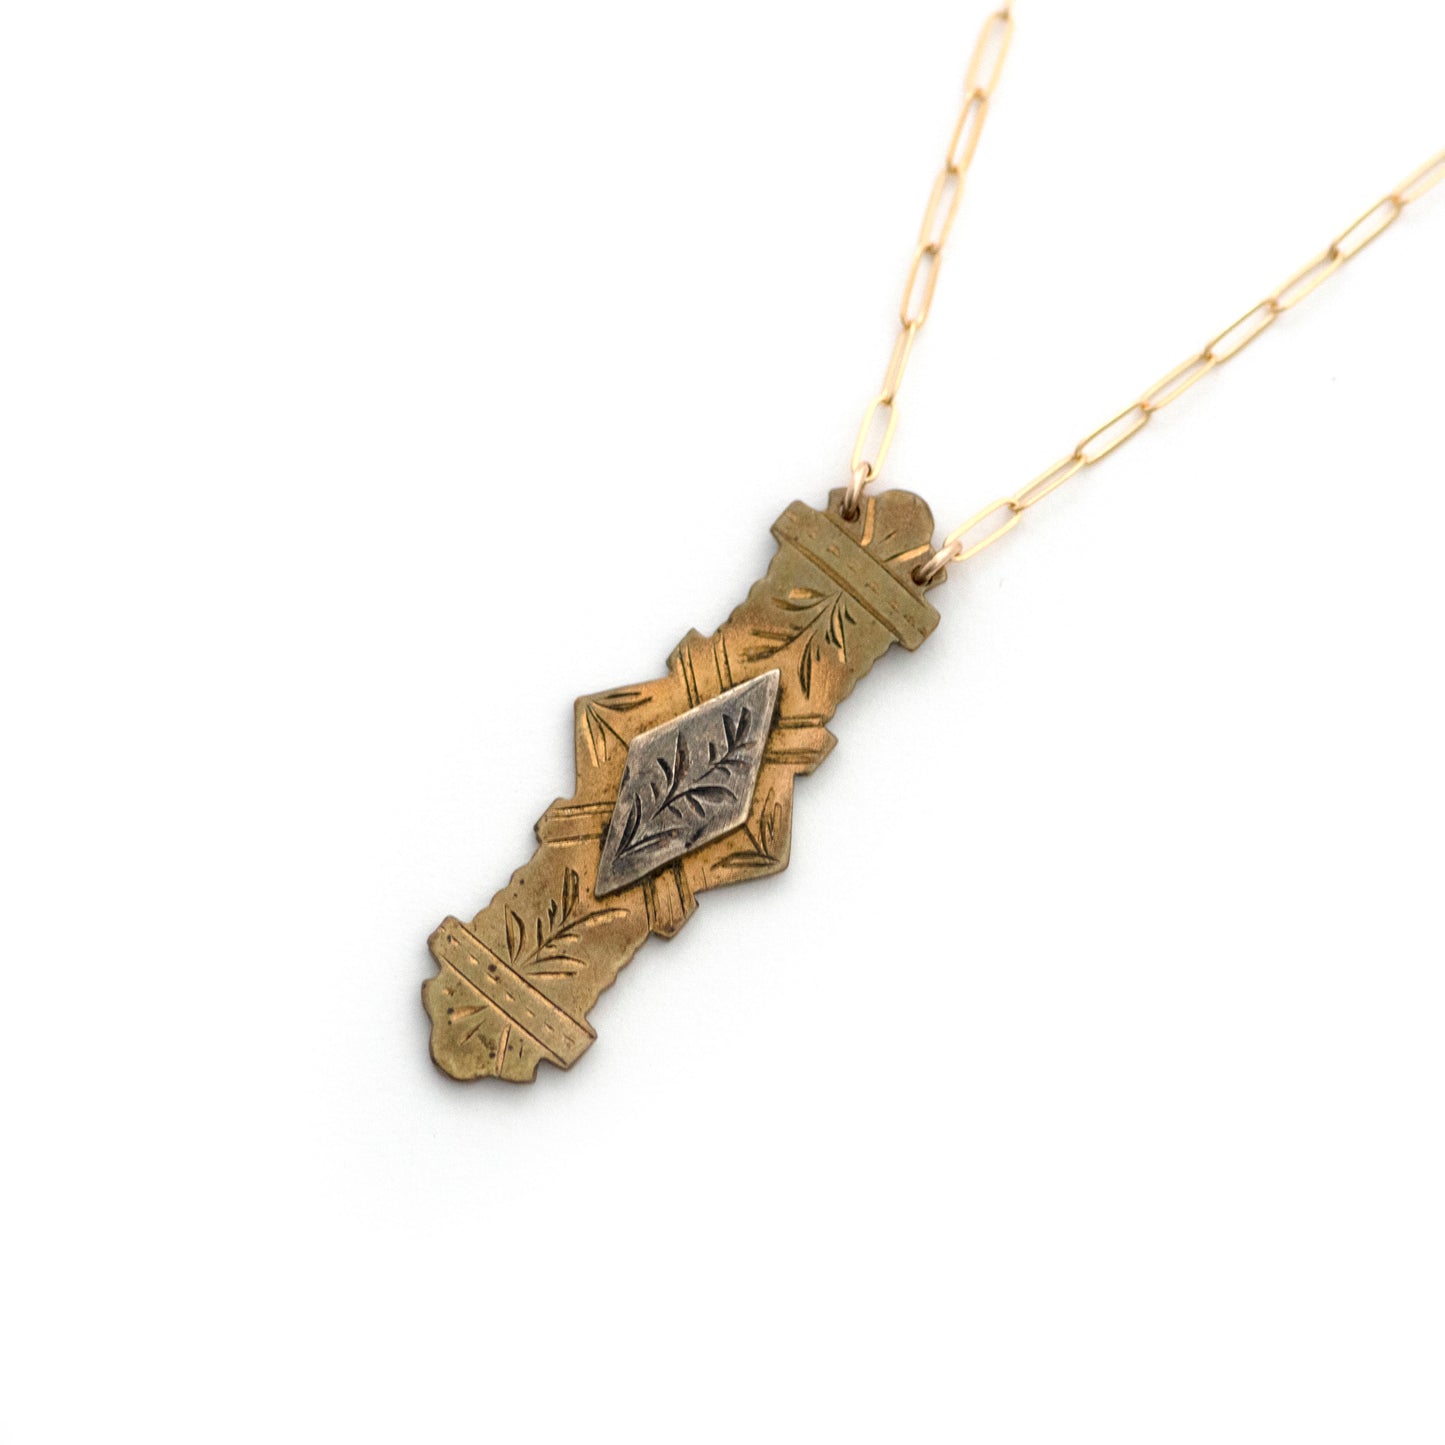 This one-of-a-kind conversion necklace is made up of:  Sterling on Brass Victorian bar pin pendant from the late 1800s with hand engraved details. Aesthetic Movement.